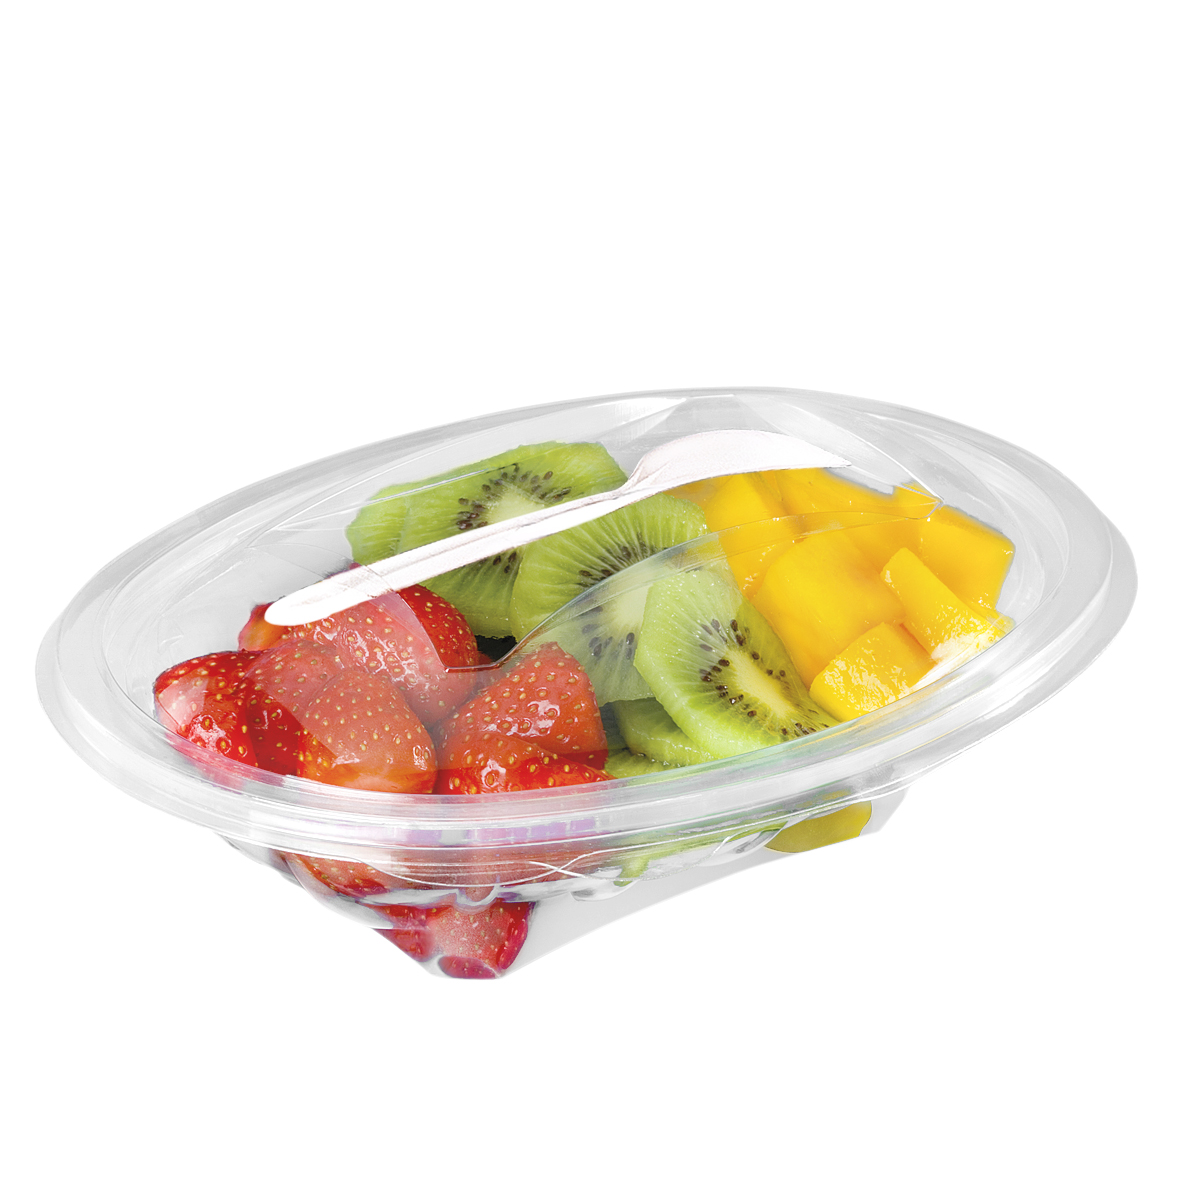 Sekipack Oval Food Container, incl. Spork 500 ml